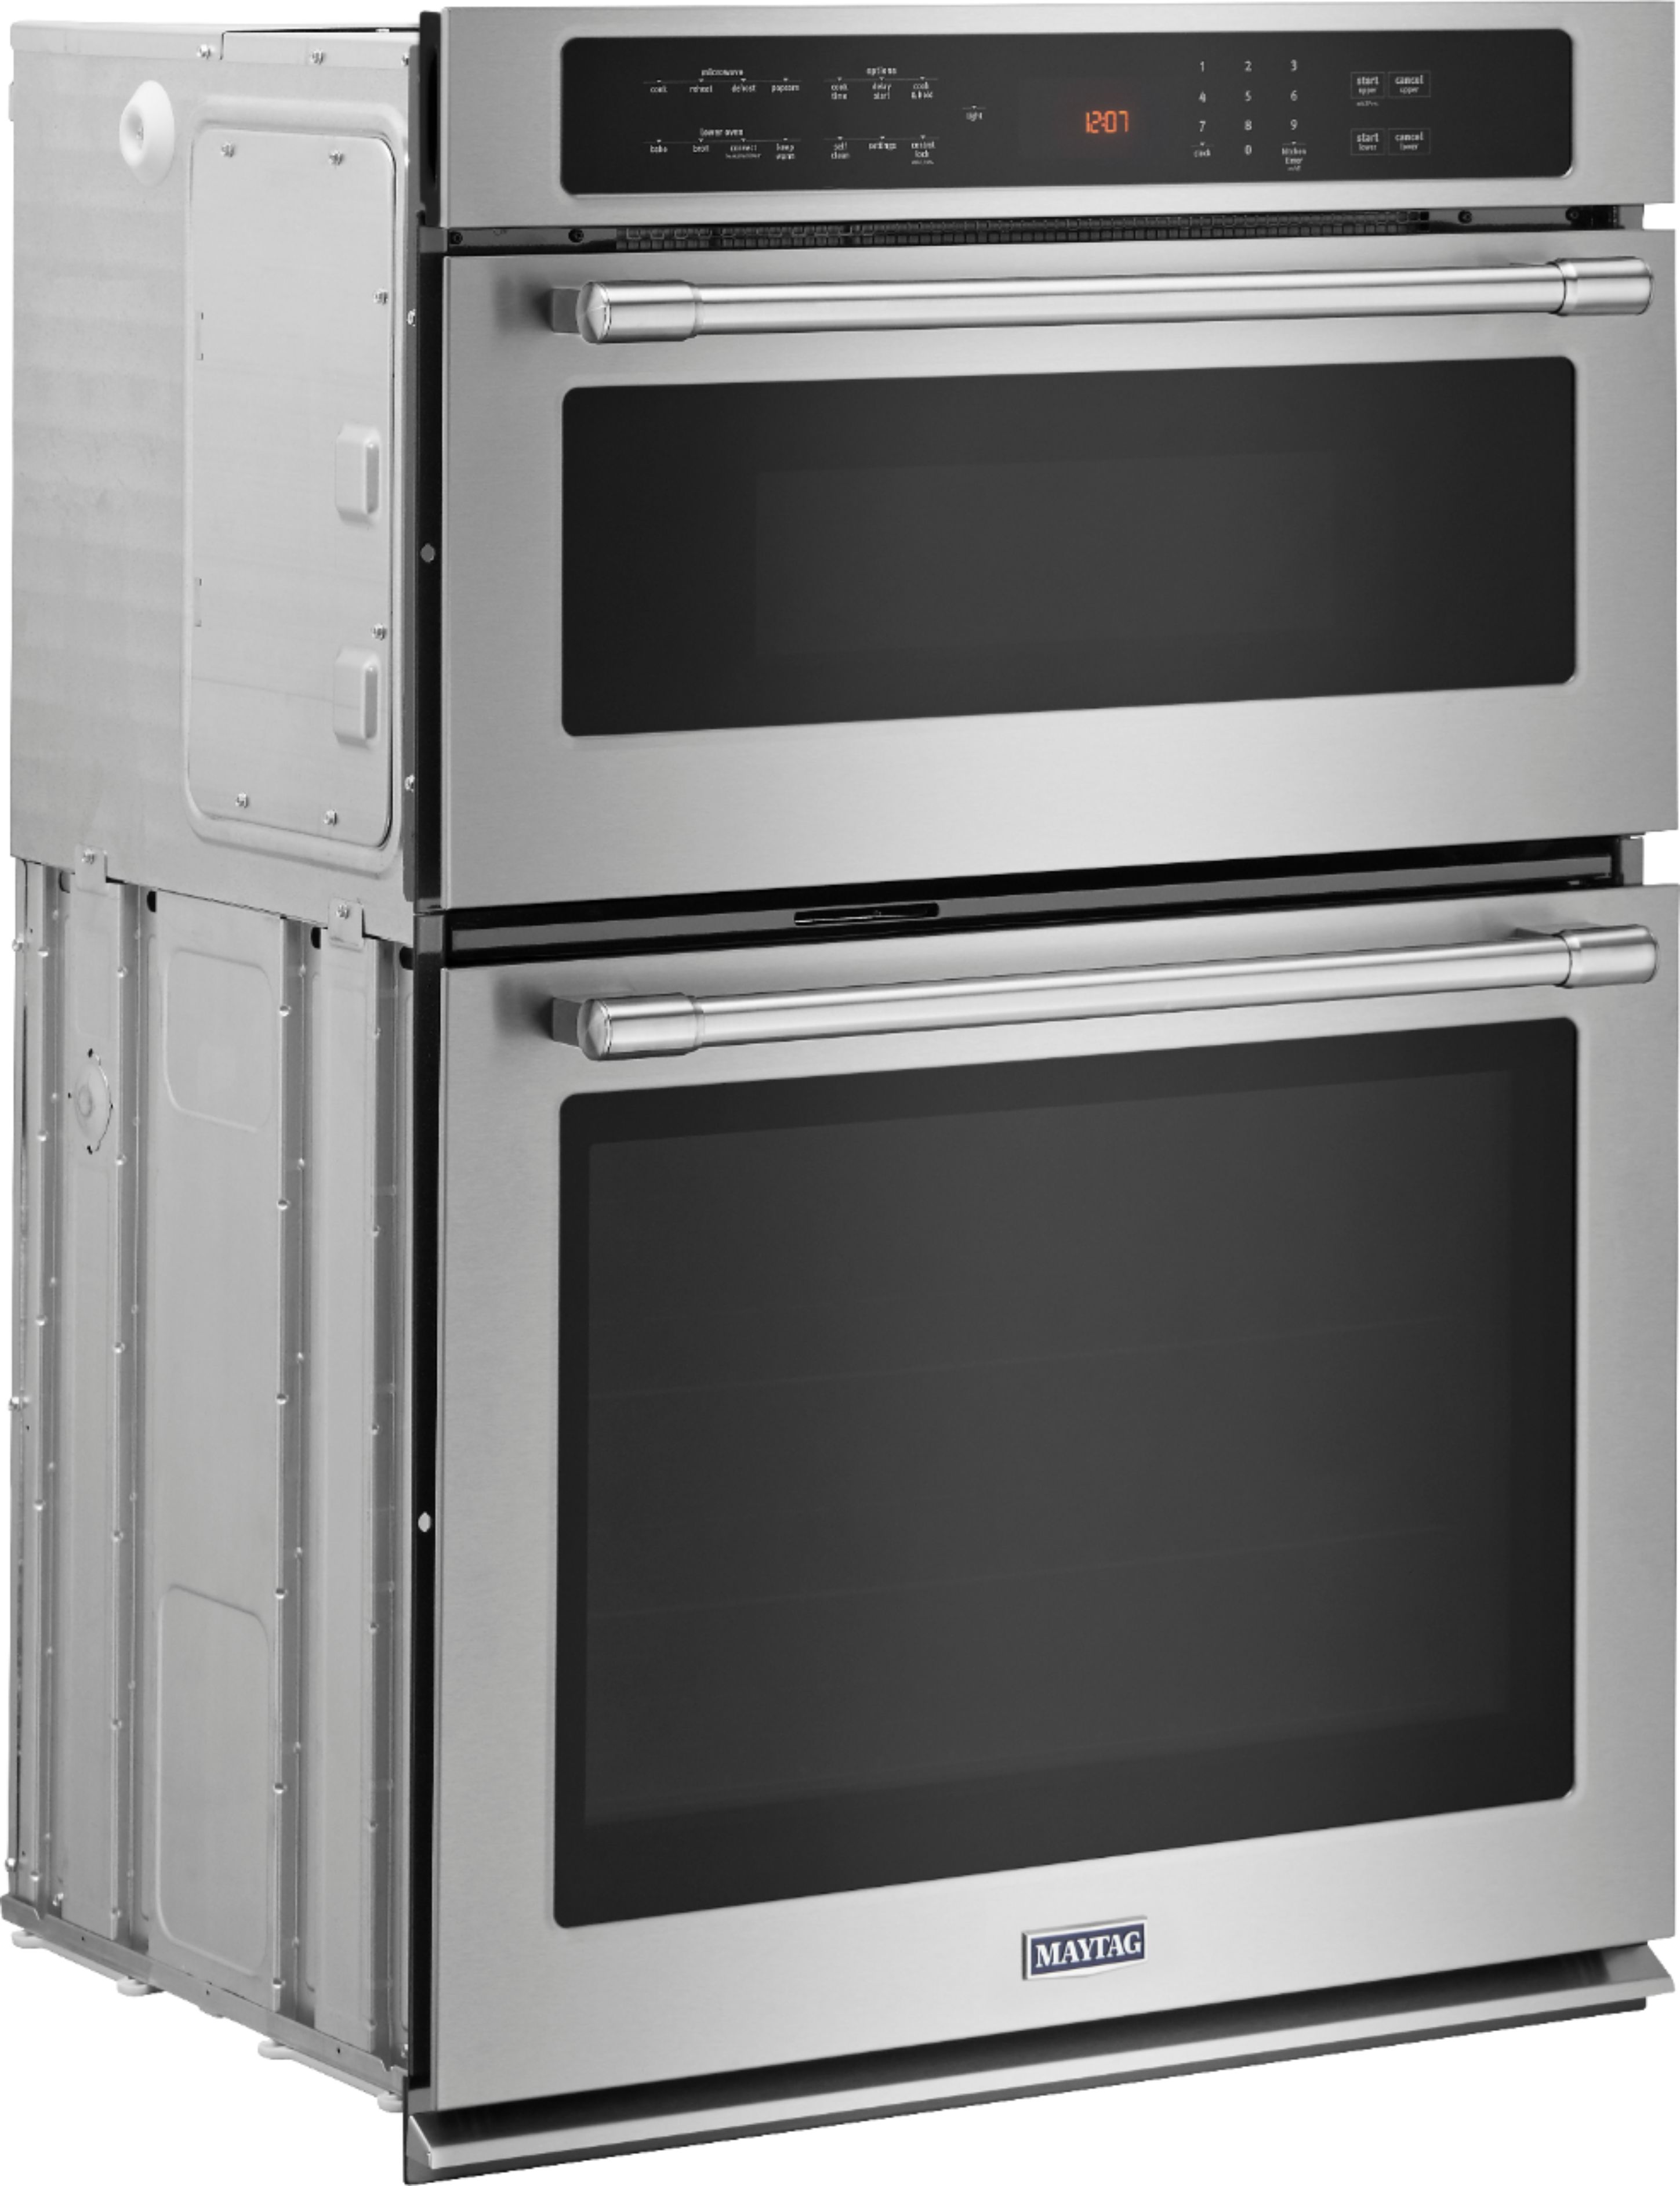 Customer Reviews: Maytag 30" Single Electric Convection Wall Oven with